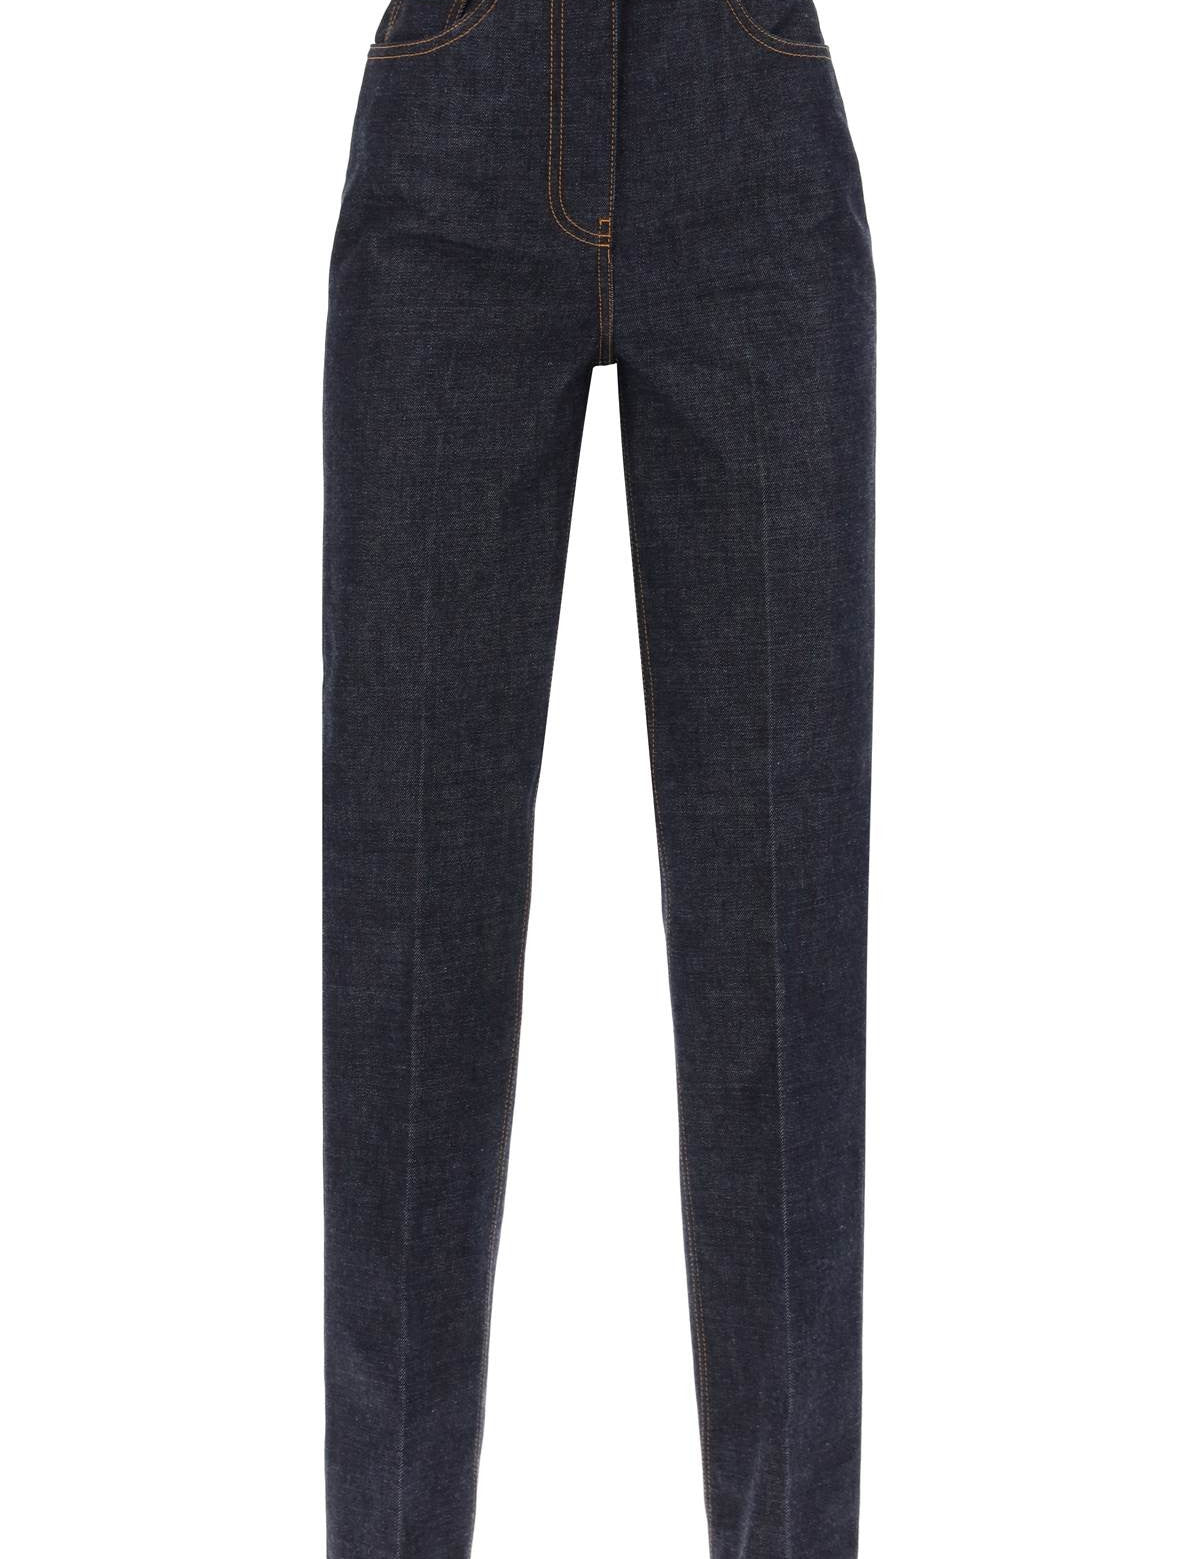 salvatore-ferragamo-straight-jeans-with-contrasting-stitching-details.jpg